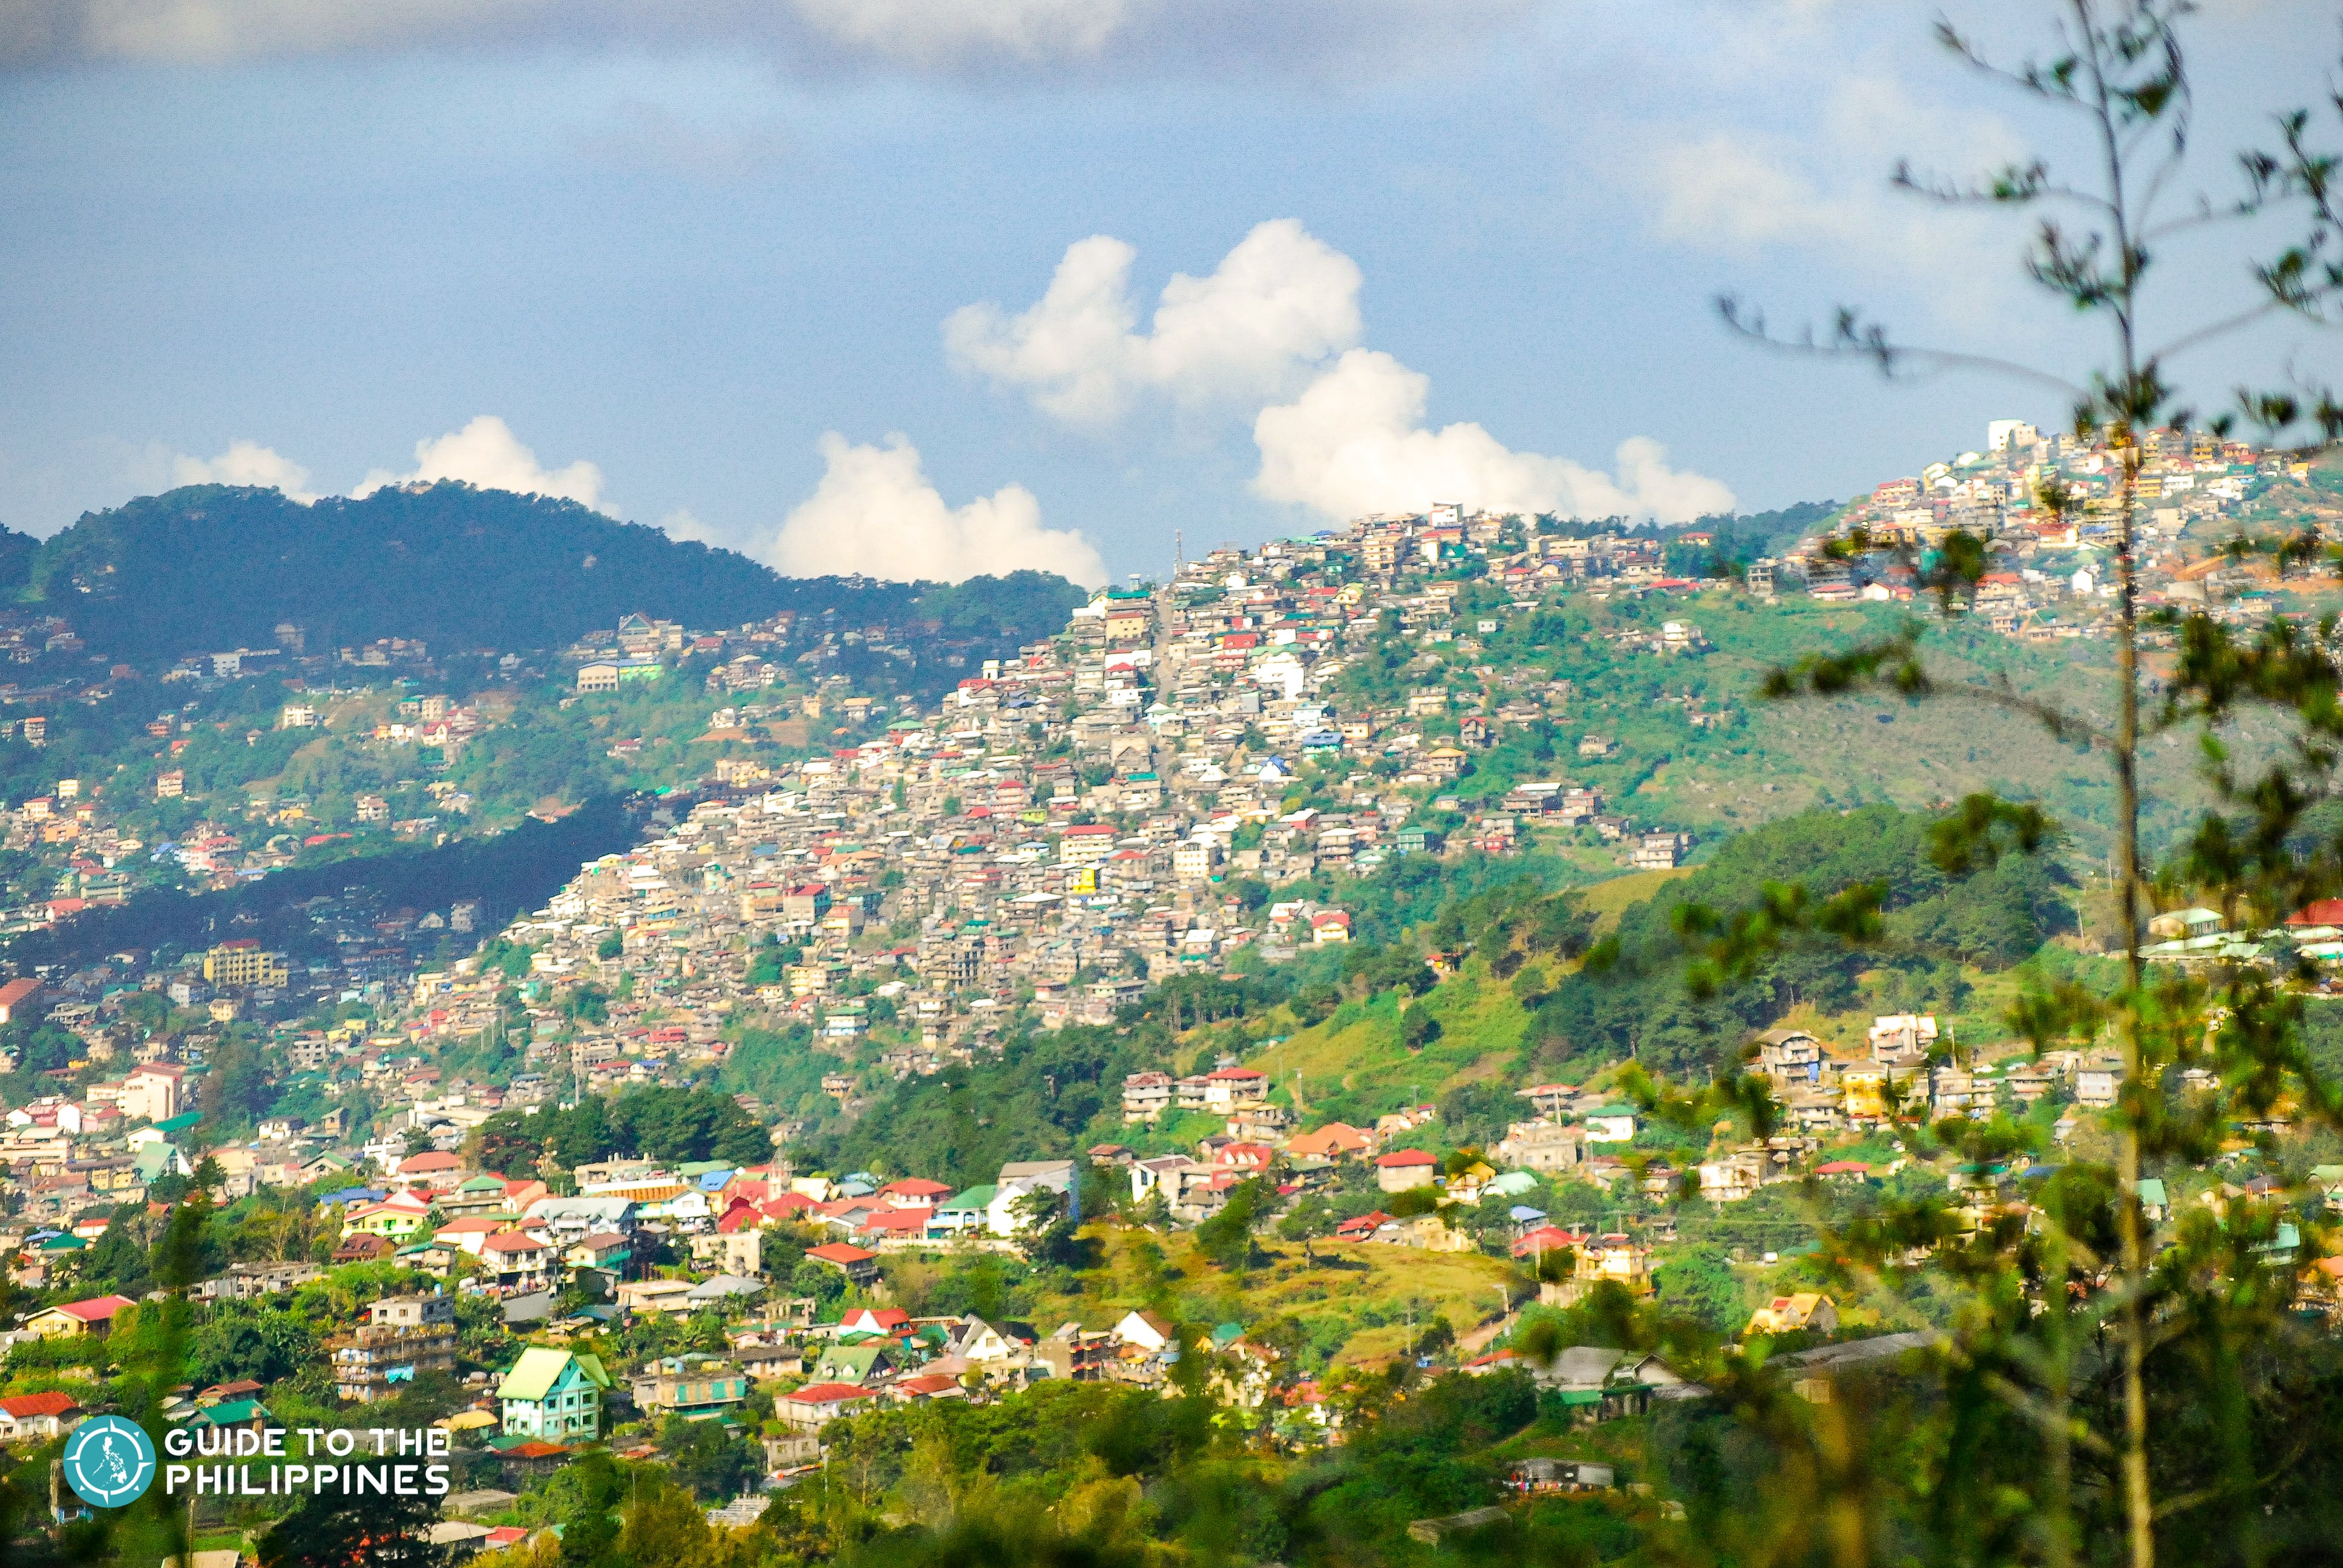 View of Baguio City's mountains